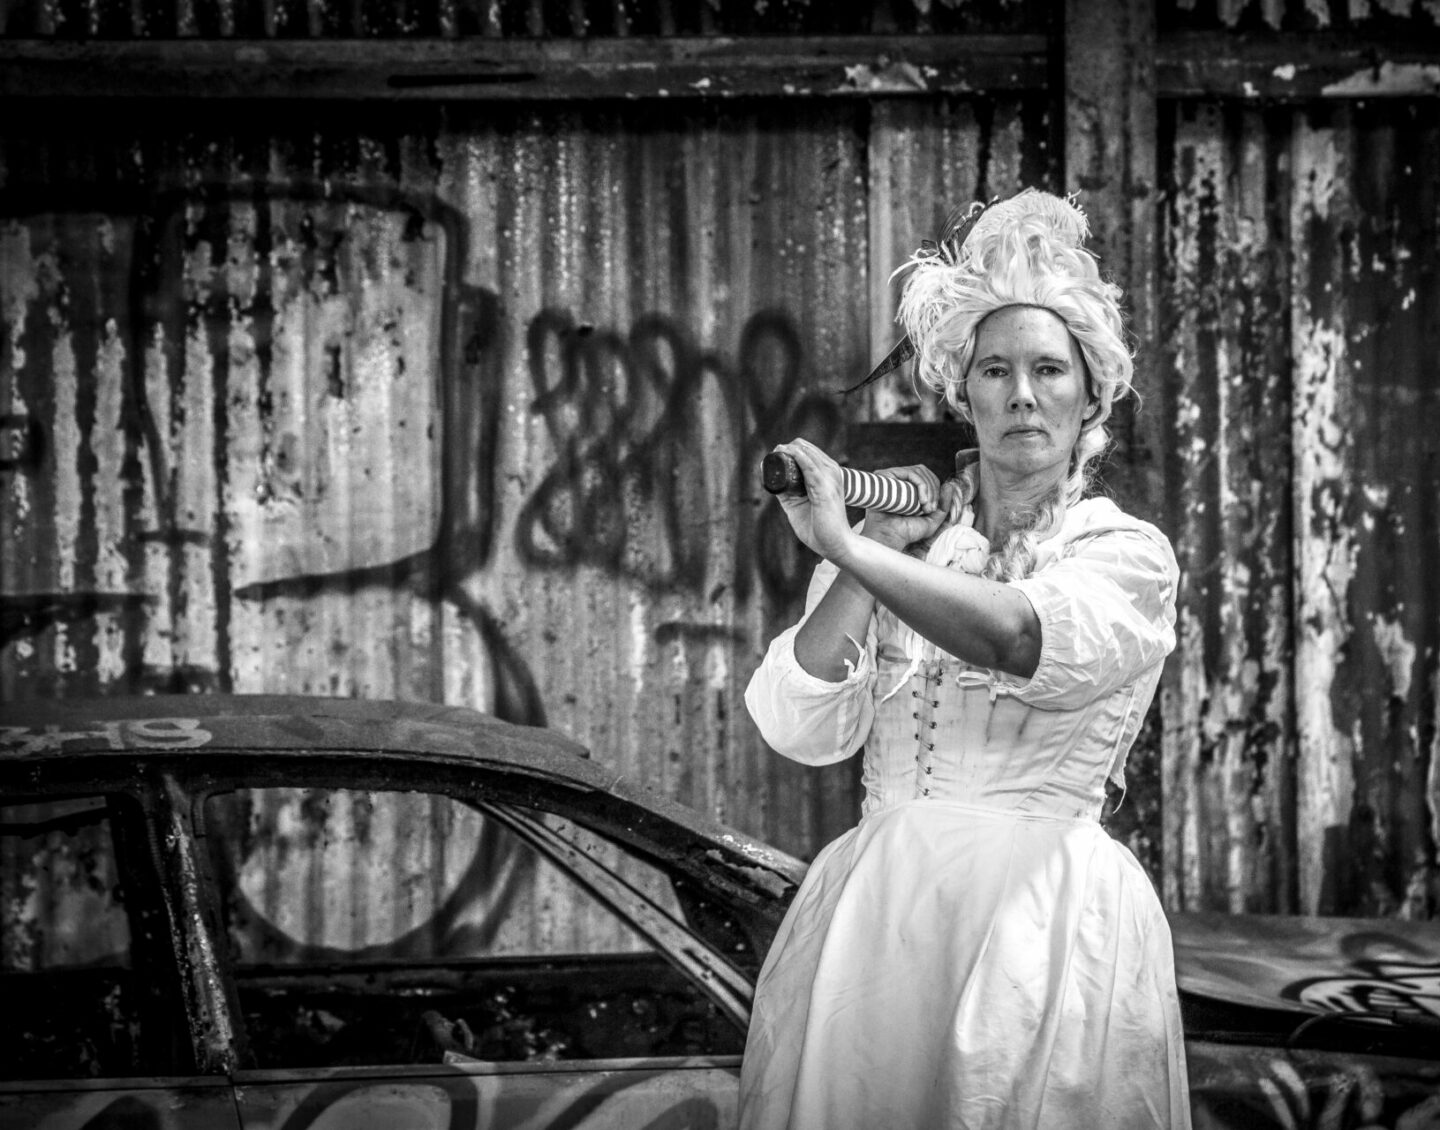 A black and white photograph of a woman in white period clothing, holding something with a long handle over her shoulder. She stands in front of a car and wall of corrugated metal, both covered in graffiti tags